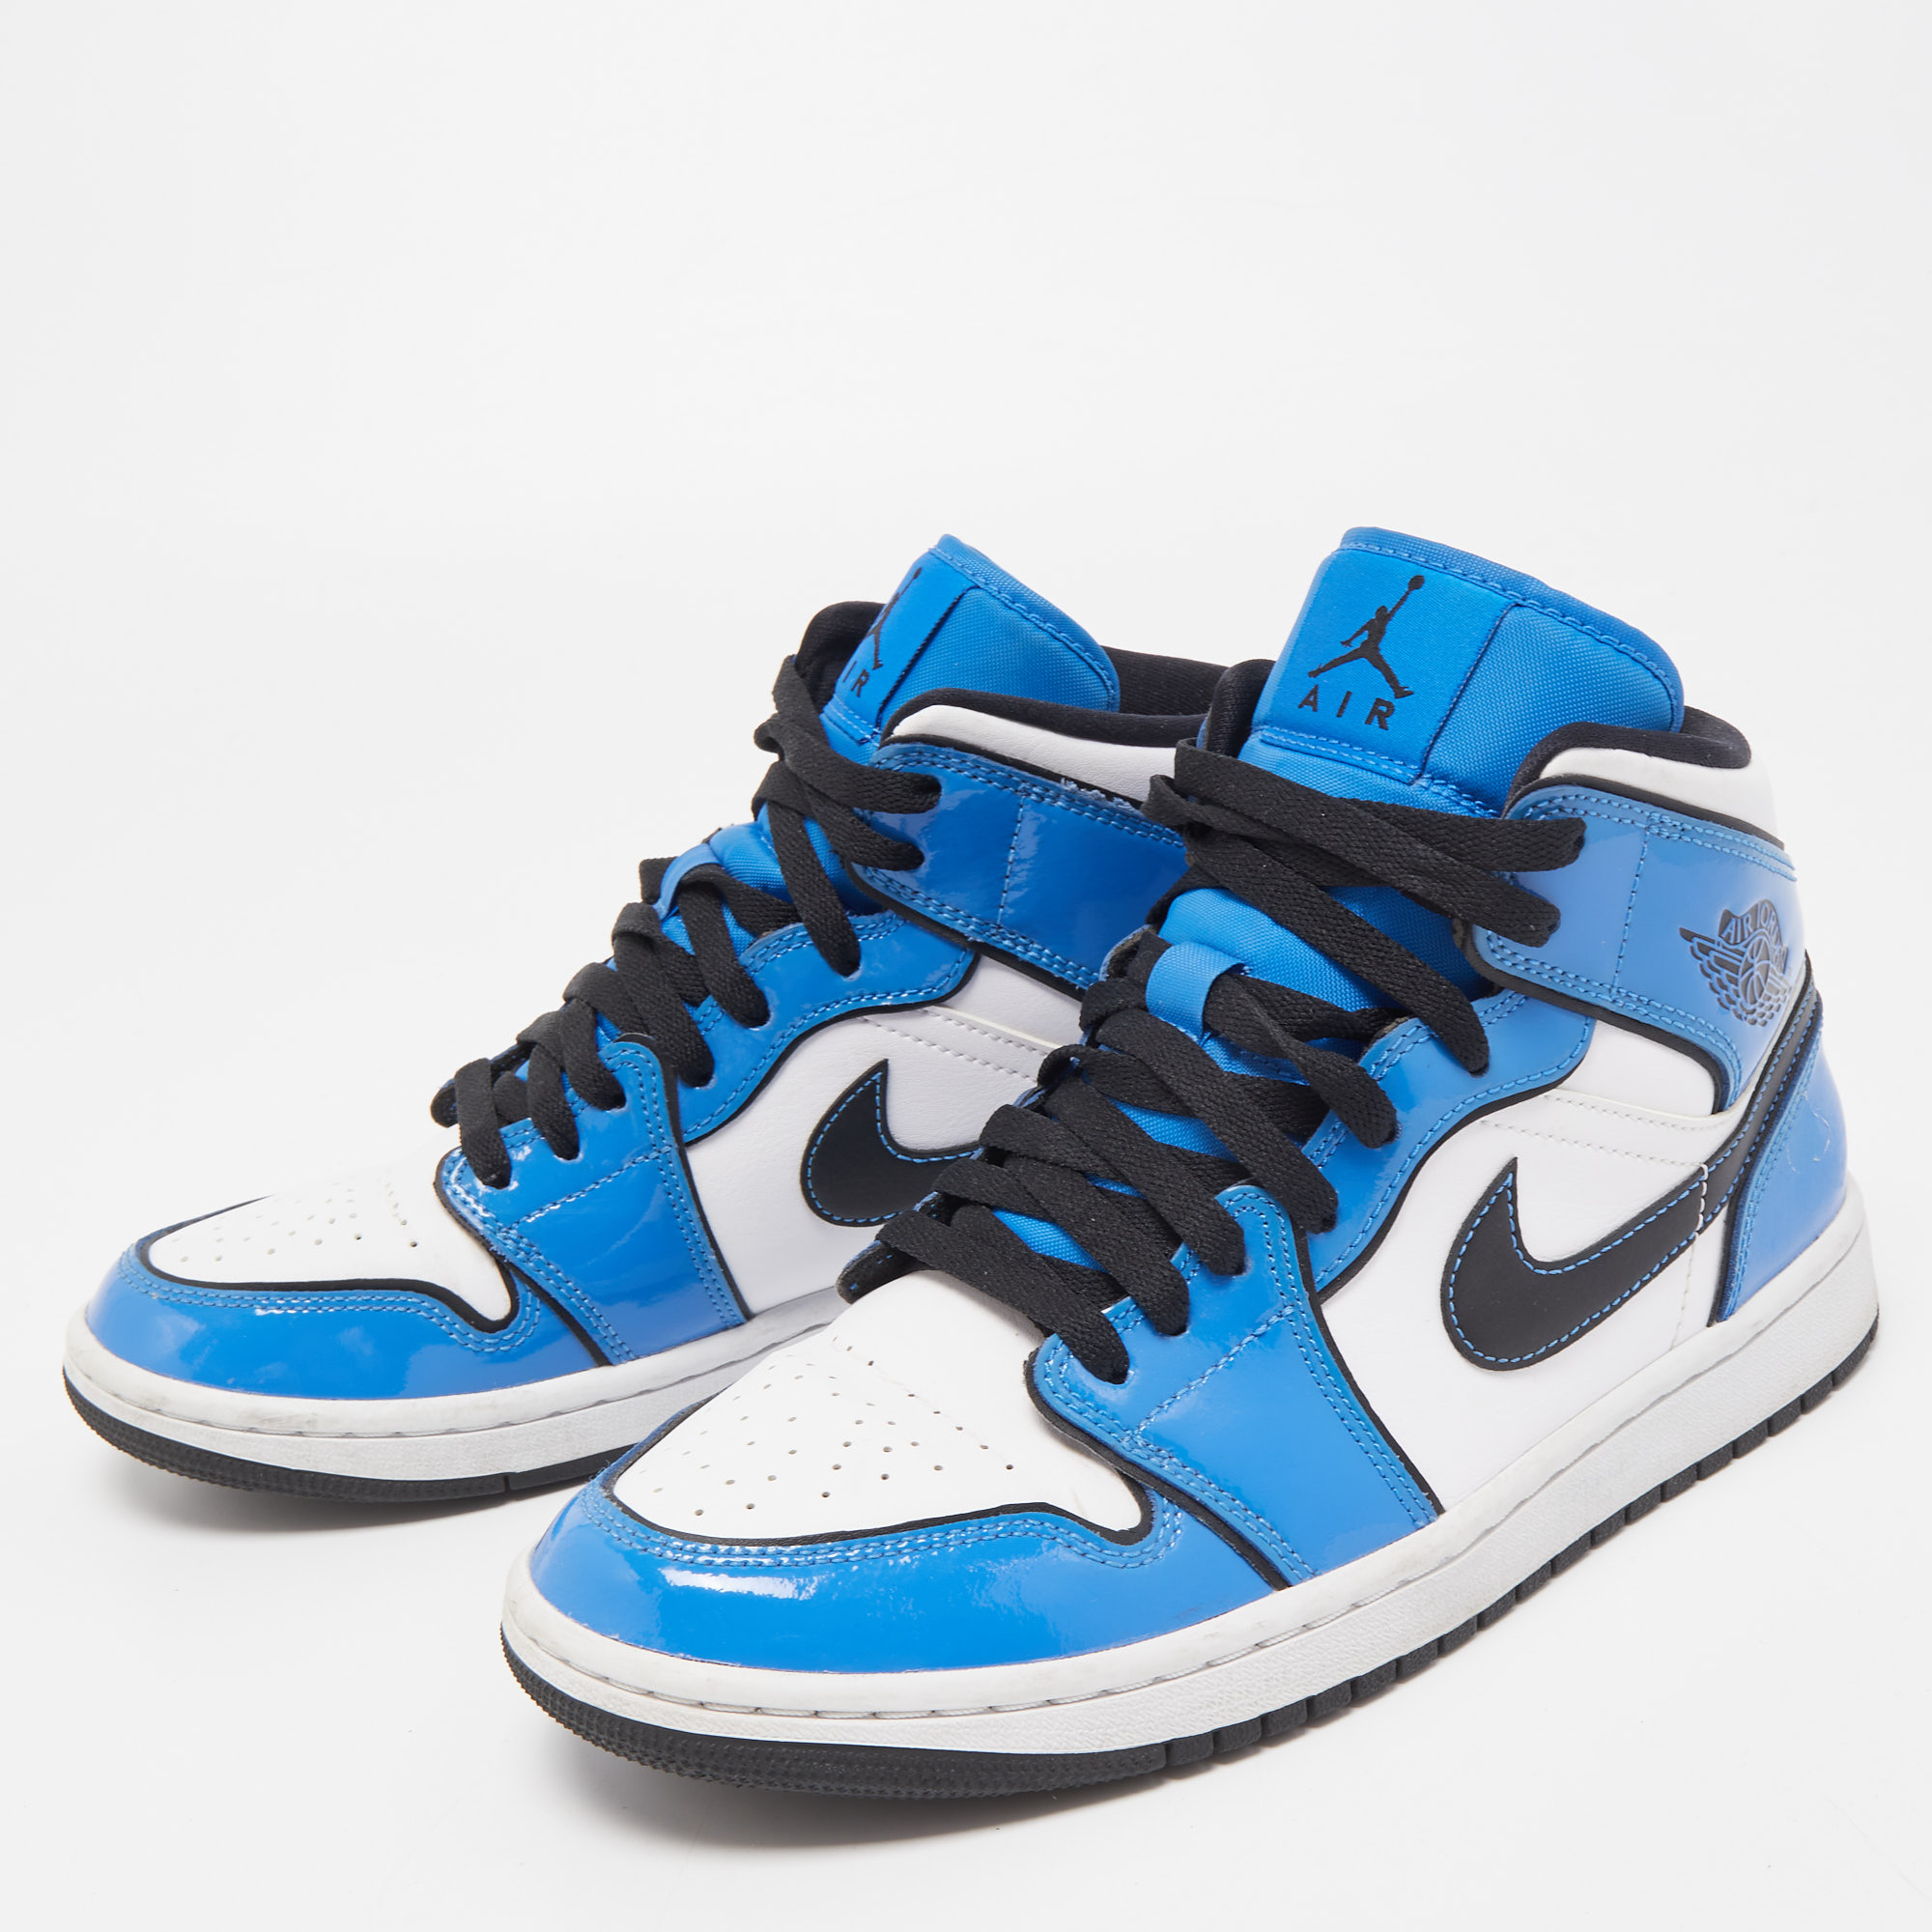 

Air Jordans Tricolor Patent and Leather Air Jordan 1 Mid Signal Blue Sneakers Size